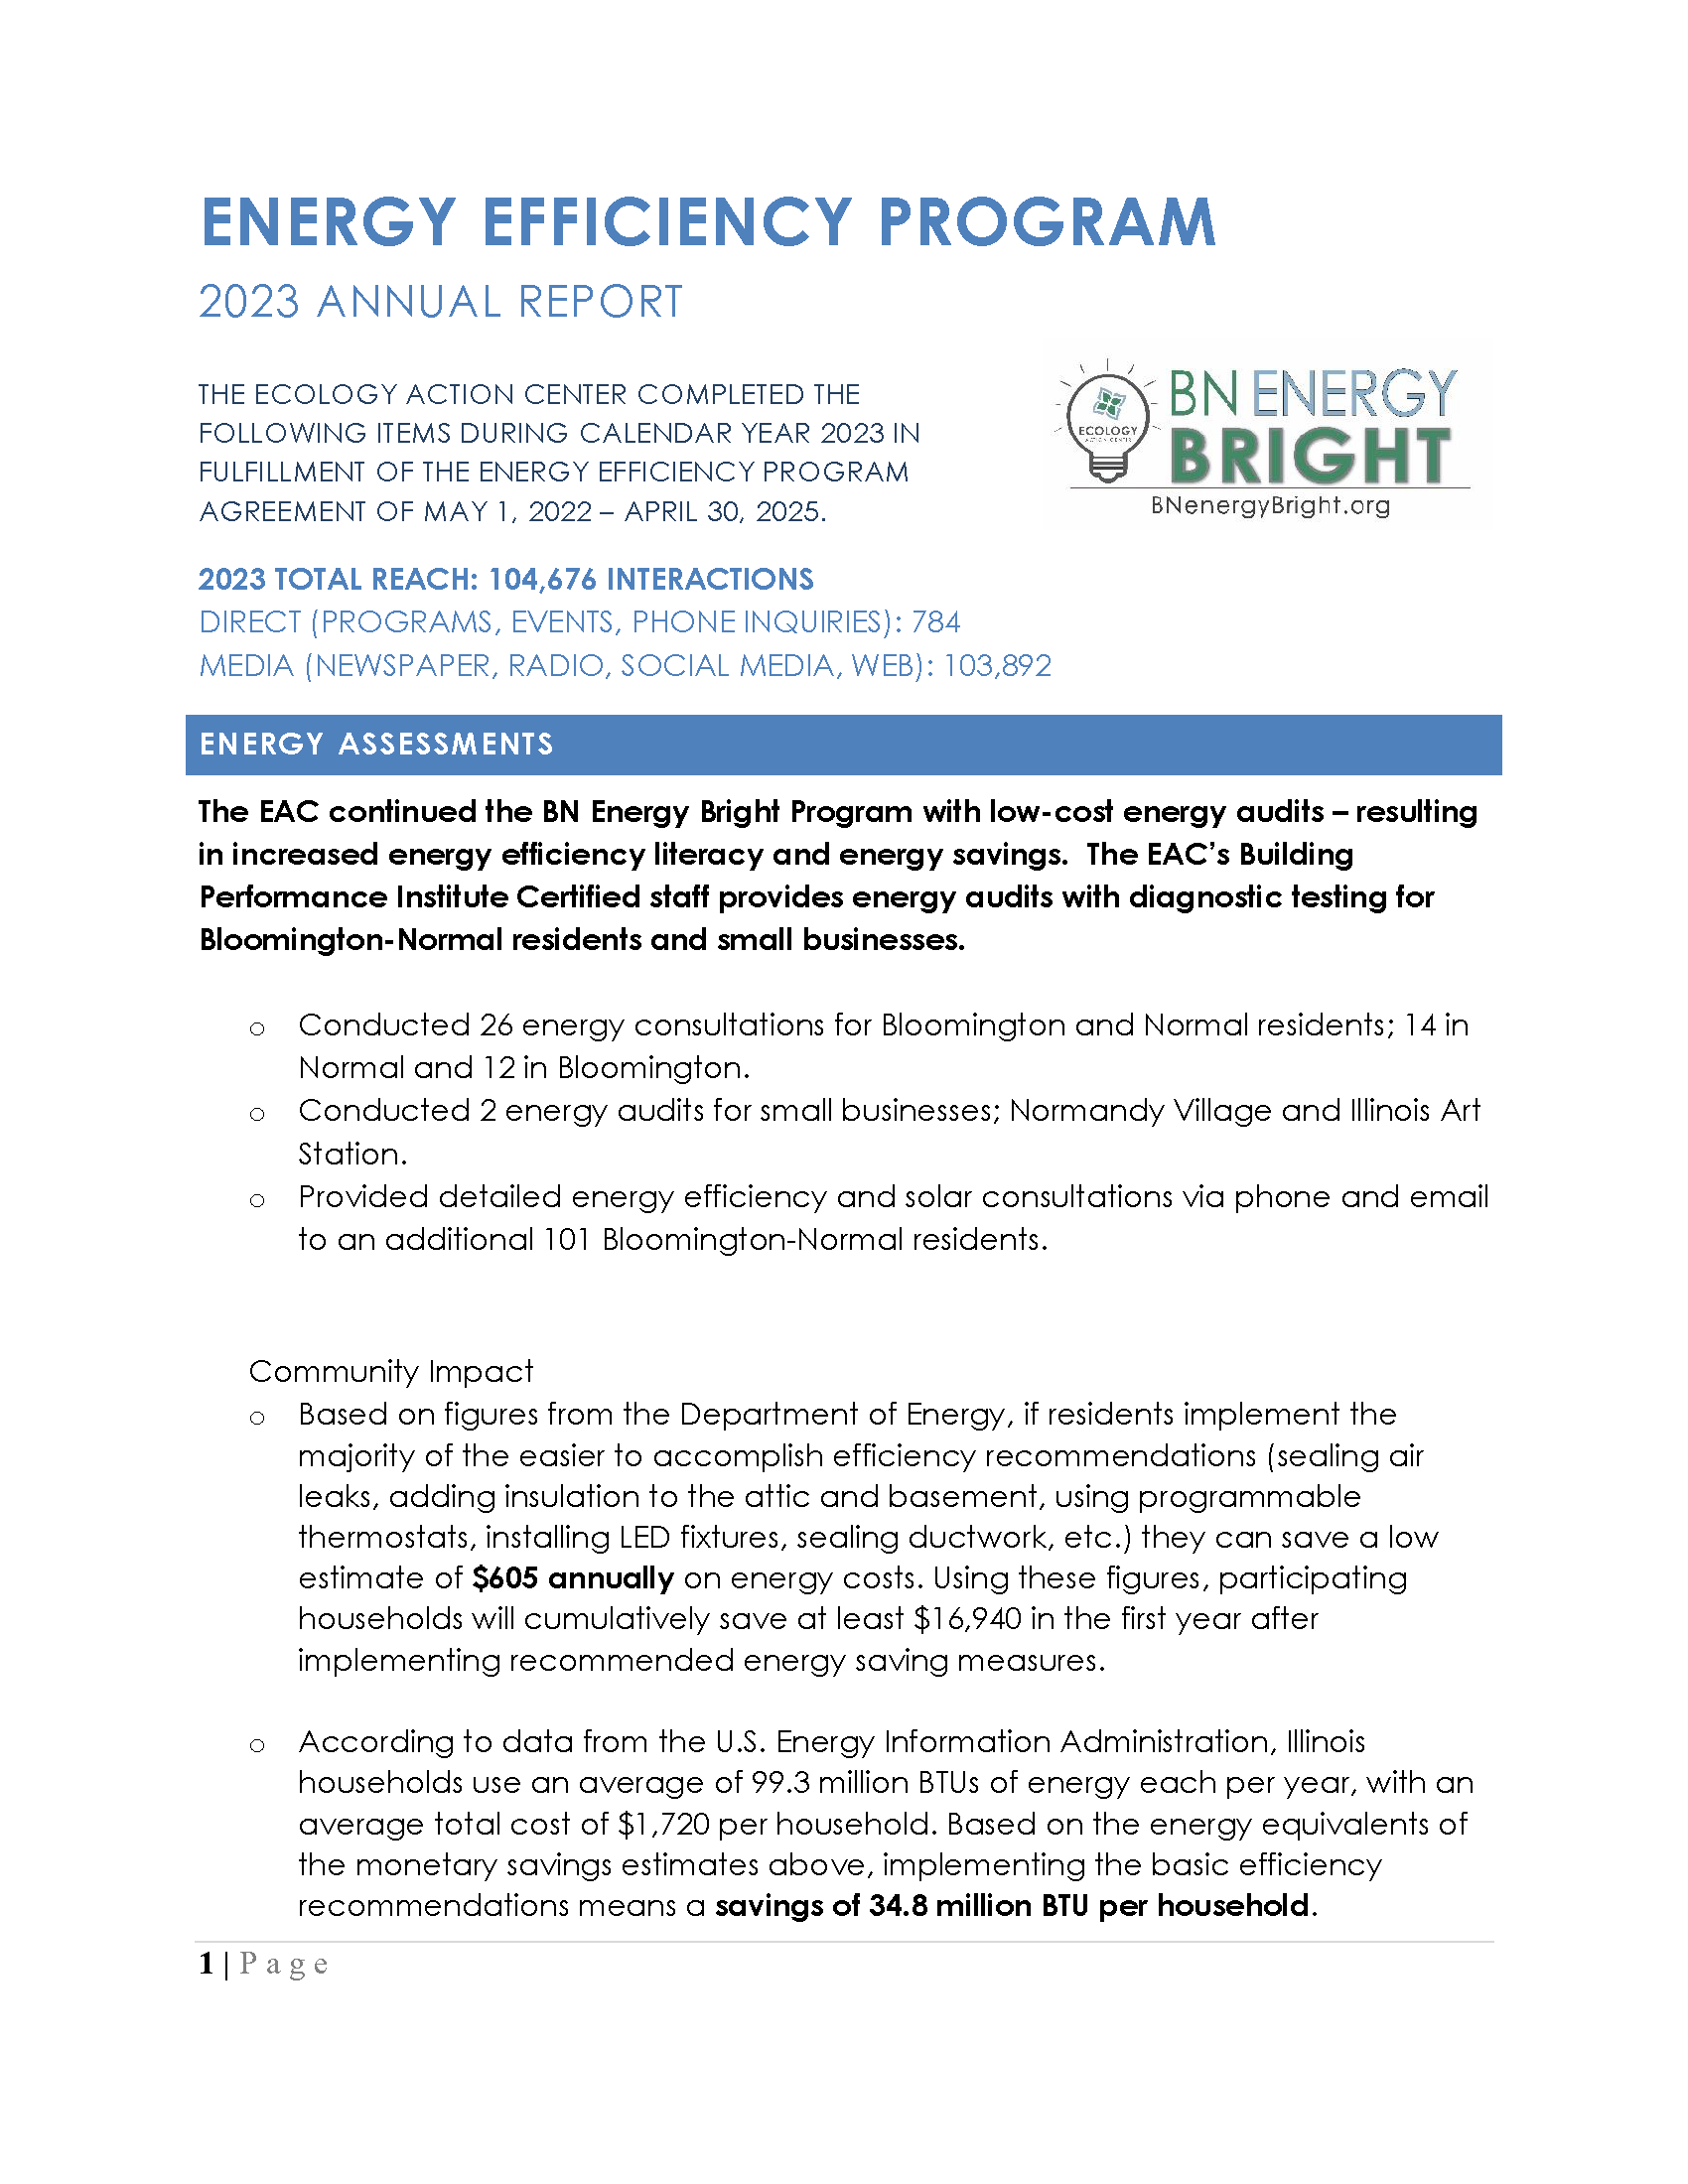 First page of the 2023 Annual Energy Report 